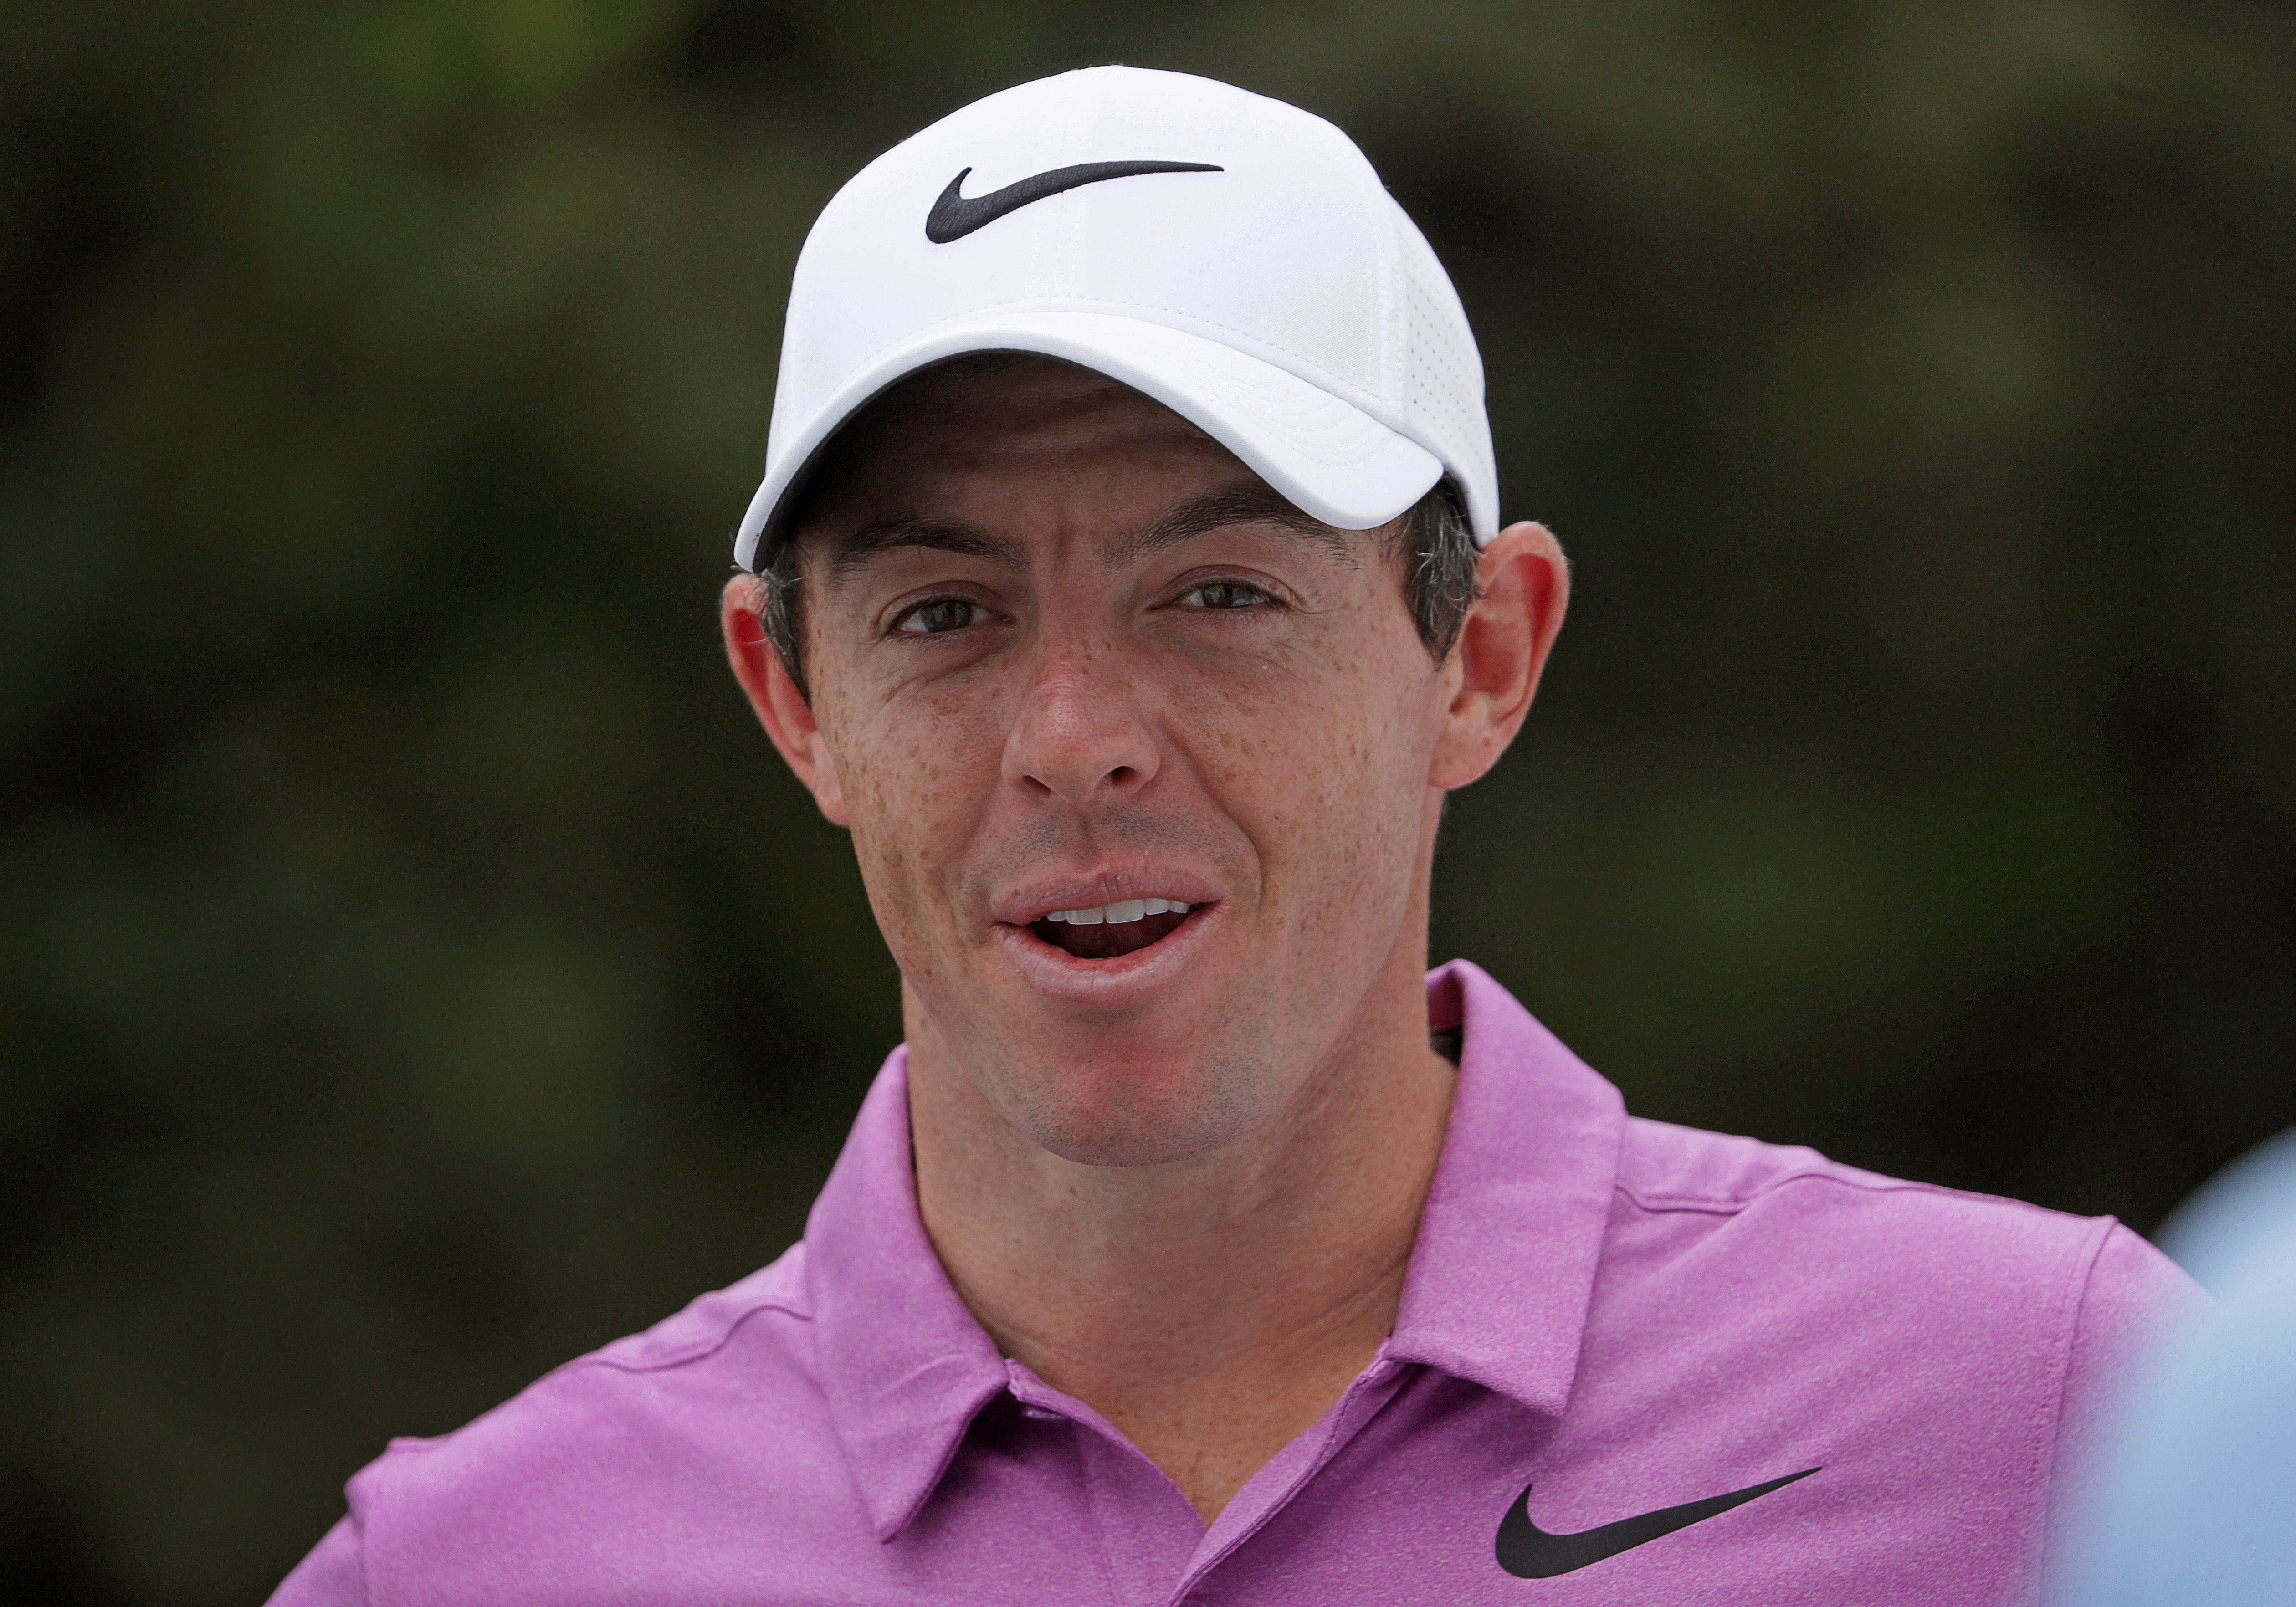 Rory McIlroy's mansion is up for sale, and it's yours for .9 million